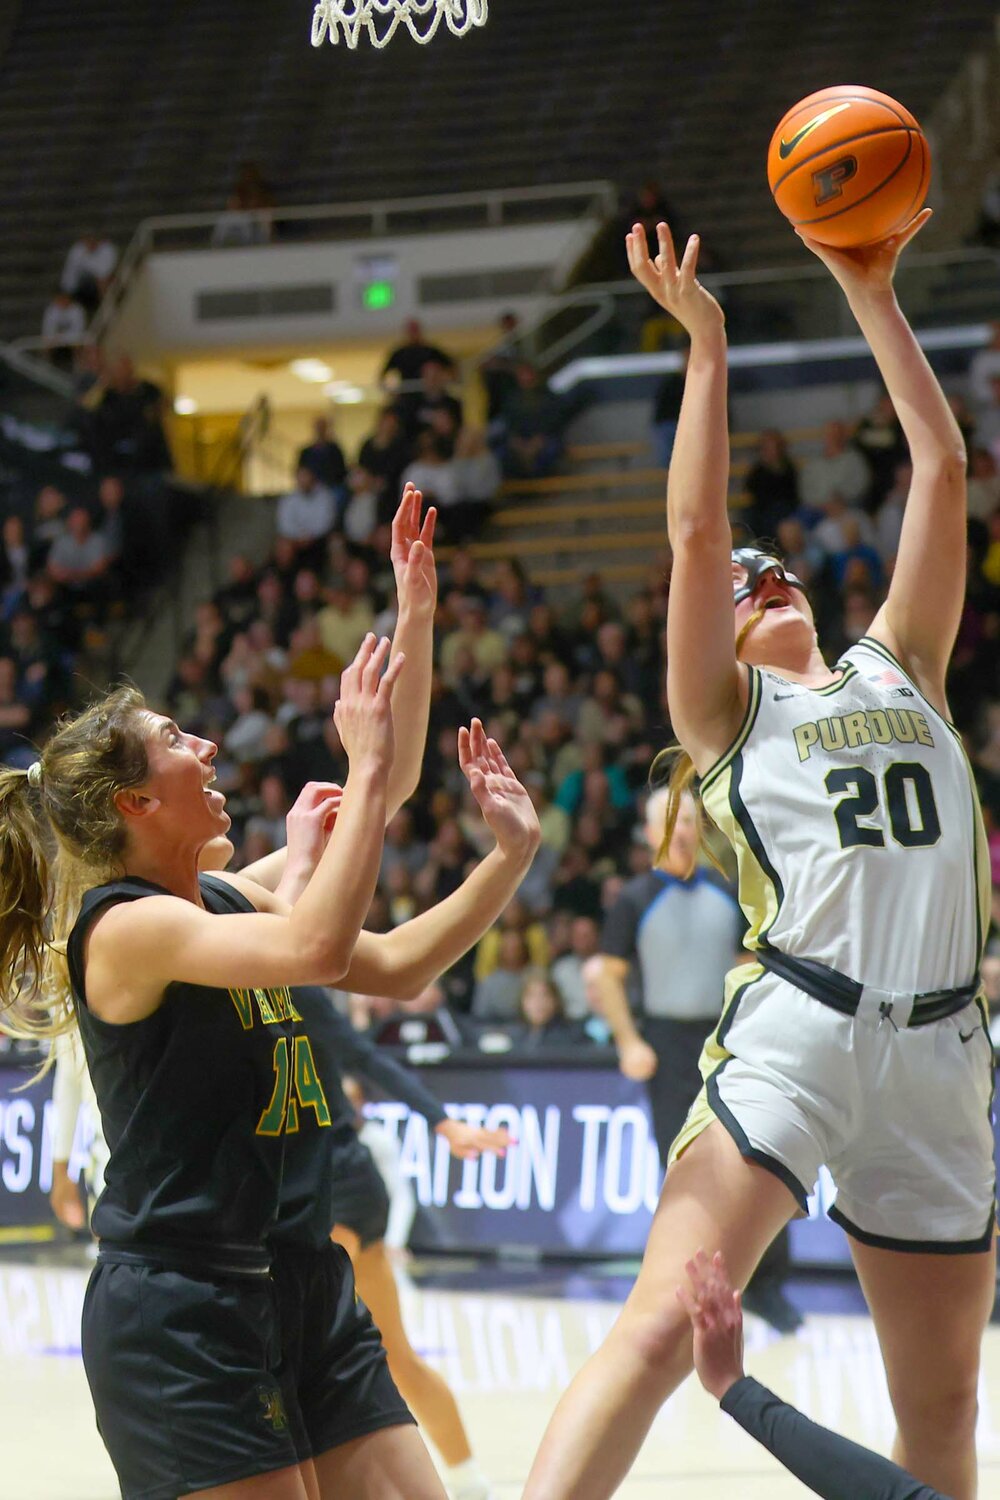 Mary Ashley Stevenson of Purdue - shooting a lay-up versus Vermont